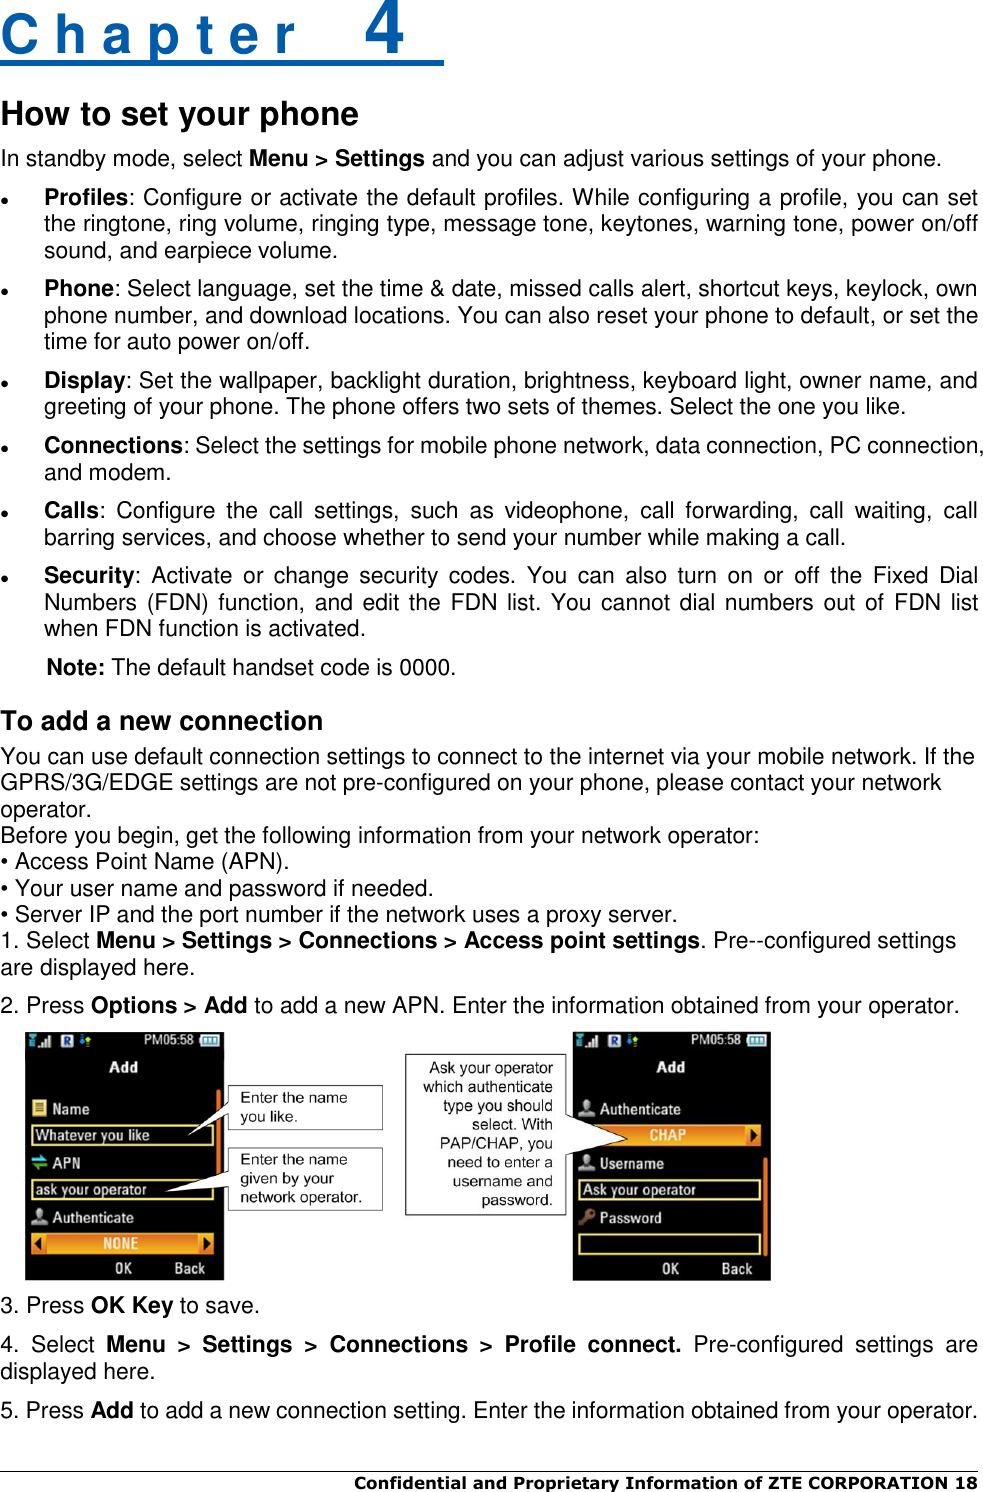  Confidential and Proprietary Information of ZTE CORPORATION 18   C h a p t e r    4   How to set your phone In standby mode, select Menu &gt; Settings and you can adjust various settings of your phone.  Profiles: Configure or activate the default profiles. While configuring a profile, you can set the ringtone, ring volume, ringing type, message tone, keytones, warning tone, power on/off sound, and earpiece volume.  Phone: Select language, set the time &amp; date, missed calls alert, shortcut keys, keylock, own phone number, and download locations. You can also reset your phone to default, or set the time for auto power on/off.  Display: Set the wallpaper, backlight duration, brightness, keyboard light, owner name, and greeting of your phone. The phone offers two sets of themes. Select the one you like.  Connections: Select the settings for mobile phone network, data connection, PC connection, and modem.  Calls:  Configure  the  call  settings,  such  as  videophone,  call  forwarding,  call  waiting,  call barring services, and choose whether to send your number while making a call.  Security:  Activate  or  change security  codes.  You  can  also  turn  on  or  off  the  Fixed  Dial Numbers (FDN) function, and edit the FDN list. You cannot dial numbers out of  FDN list when FDN function is activated. Note: The default handset code is 0000. To add a new connection You can use default connection settings to connect to the internet via your mobile network. If the GPRS/3G/EDGE settings are not pre-configured on your phone, please contact your network operator.   Before you begin, get the following information from your network operator: • Access Point Name (APN). • Your user name and password if needed. • Server IP and the port number if the network uses a proxy server. 1. Select Menu &gt; Settings &gt; Connections &gt; Access point settings. Pre--configured settings are displayed here.   2. Press Options &gt; Add to add a new APN. Enter the information obtained from your operator.     3. Press OK Key to save. 4.  Select  Menu  &gt;  Settings  &gt;  Connections  &gt;  Profile  connect.  Pre-configured  settings  are displayed here. 5. Press Add to add a new connection setting. Enter the information obtained from your operator. 